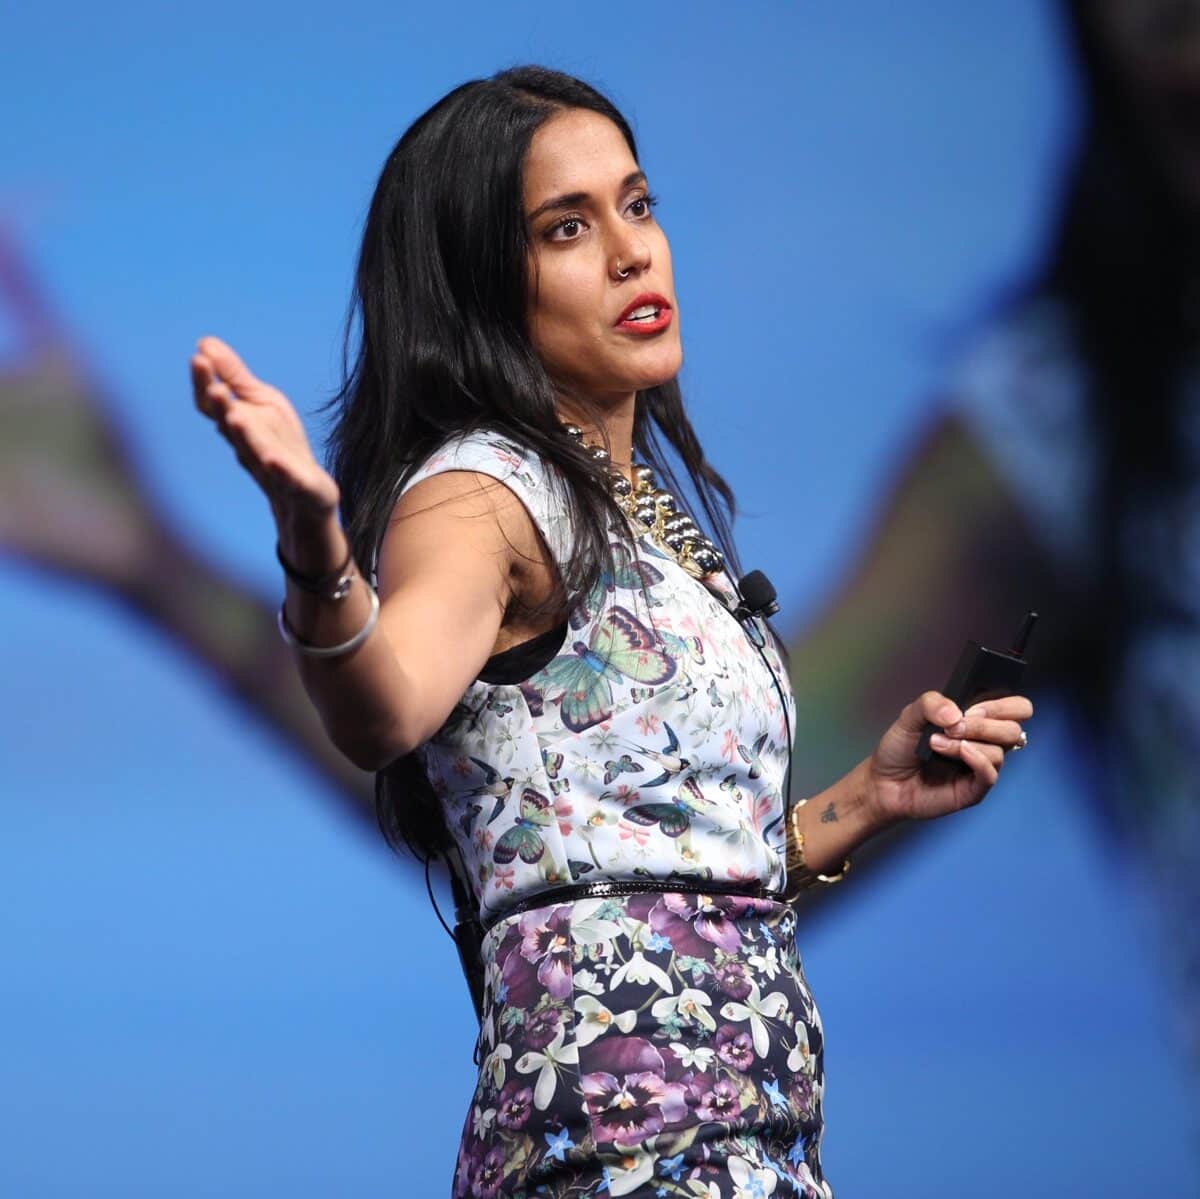 Ritu Bhasin on stage speaking in front of a screen with a wireless remote in one hand and her other arm extended in an explanatory gesture.